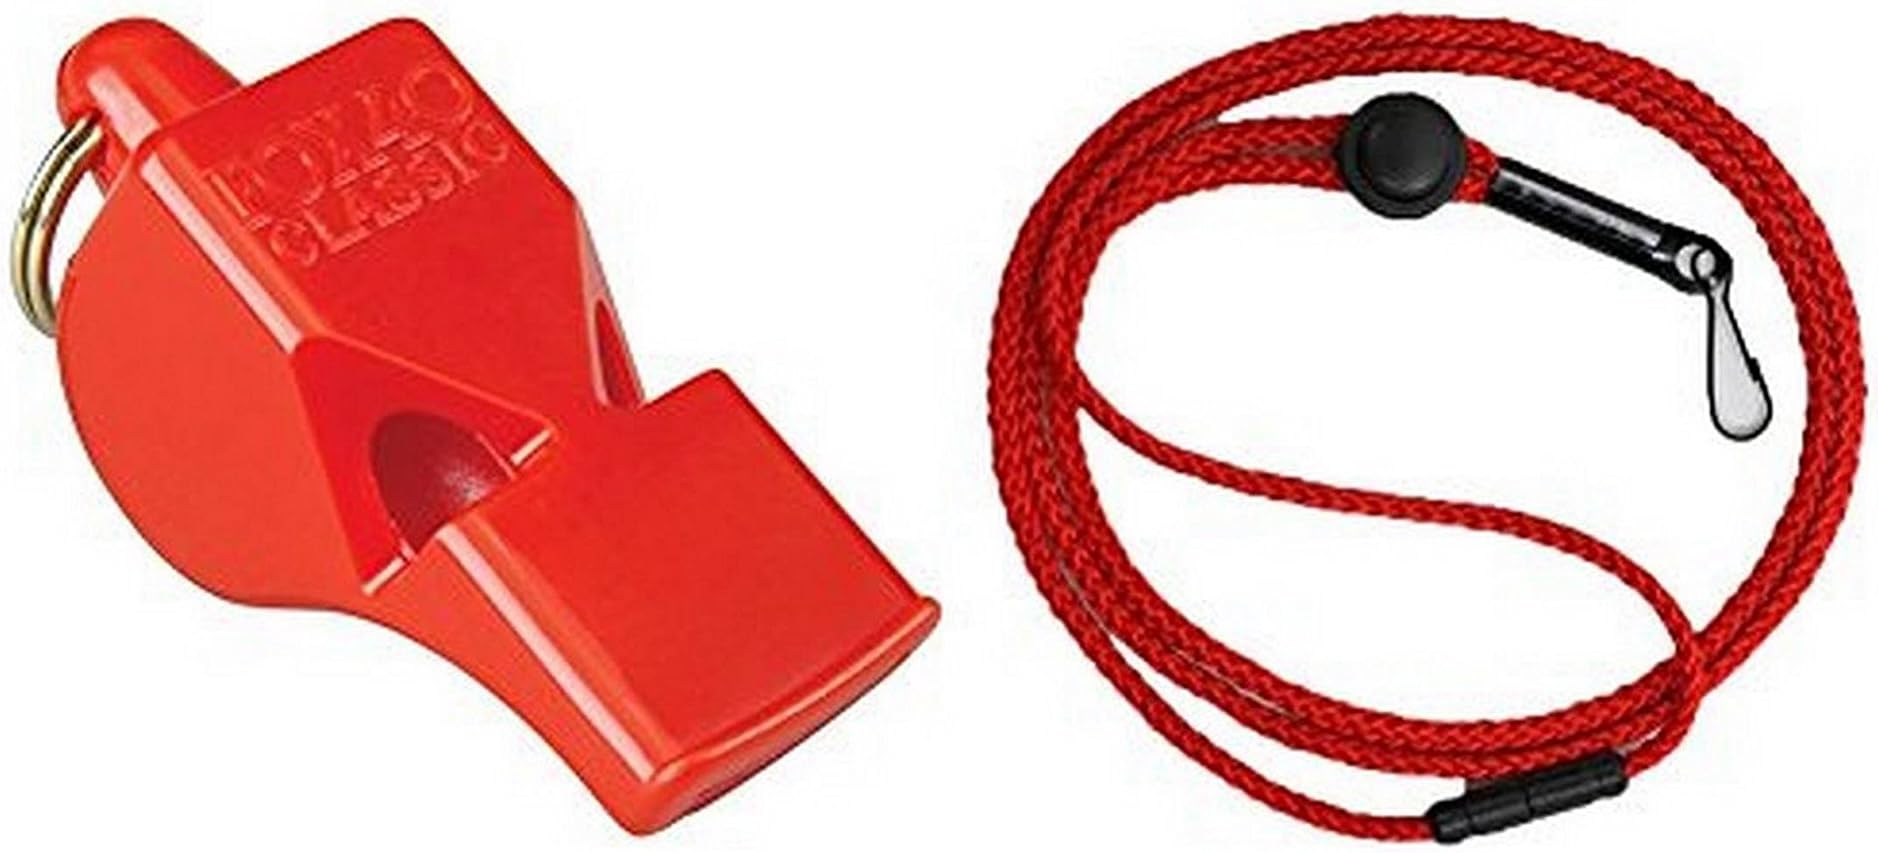 fox 40 classic official whistle with break away lanyard red  ‎fox 40 b00lb9b206